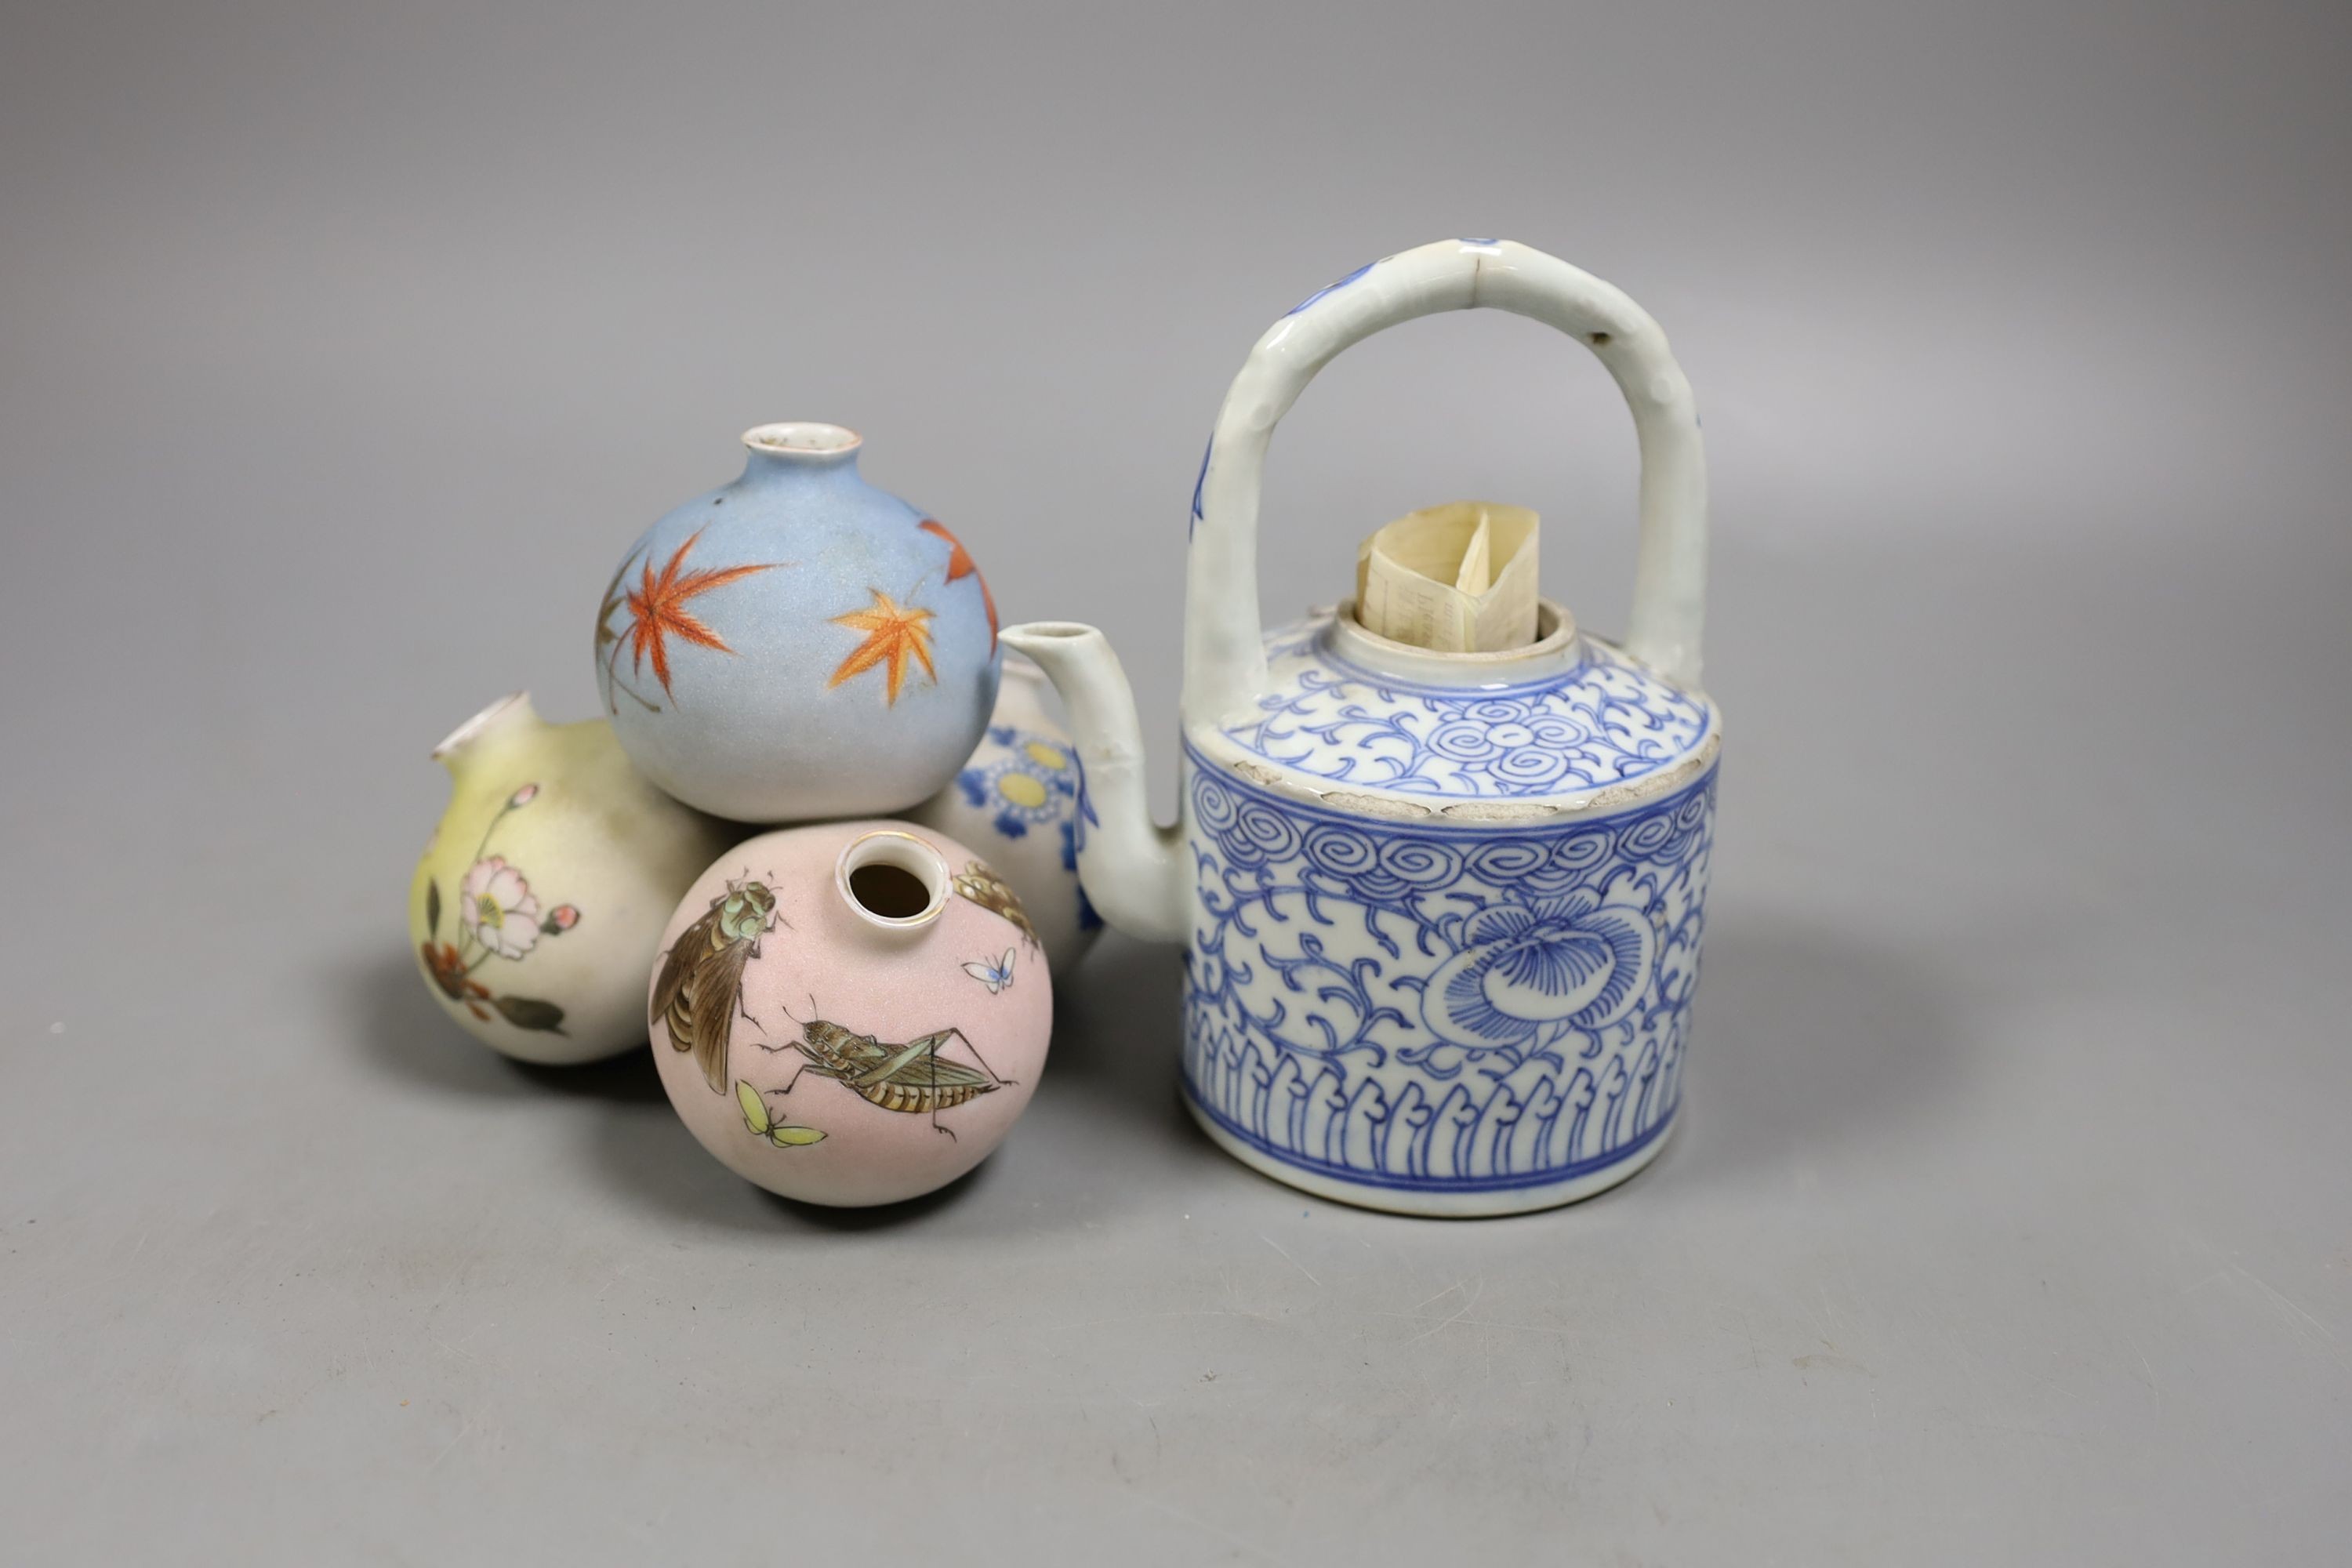 A Chinese blue and white teapot - no cover and a Japanese multiple globular posy vase, Teapot 15 cms high including handle.